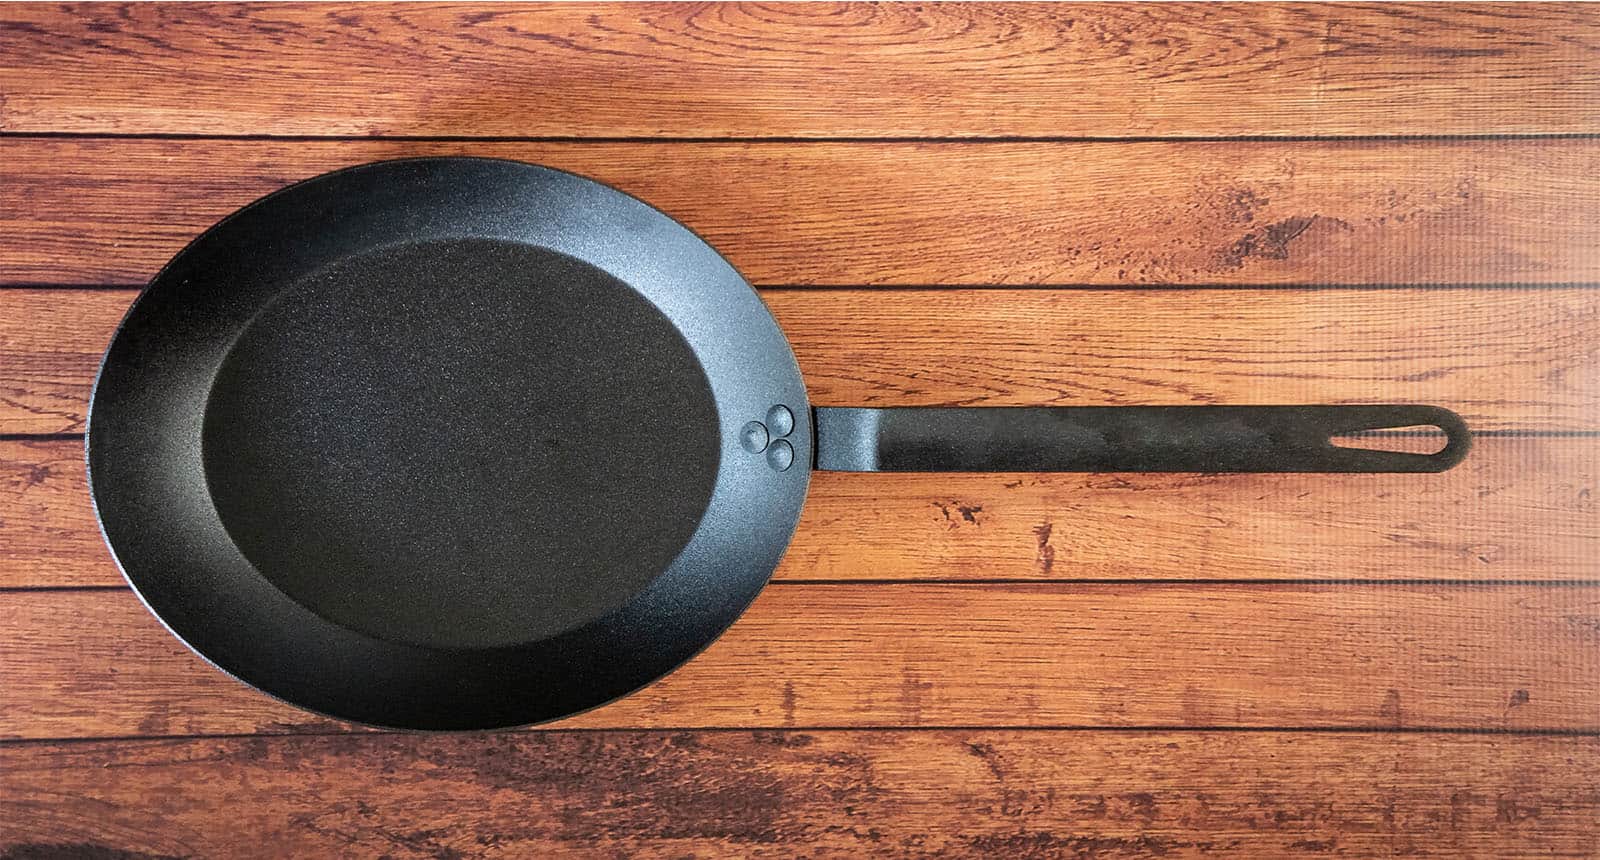 Isolate Carbon Steel Skillet